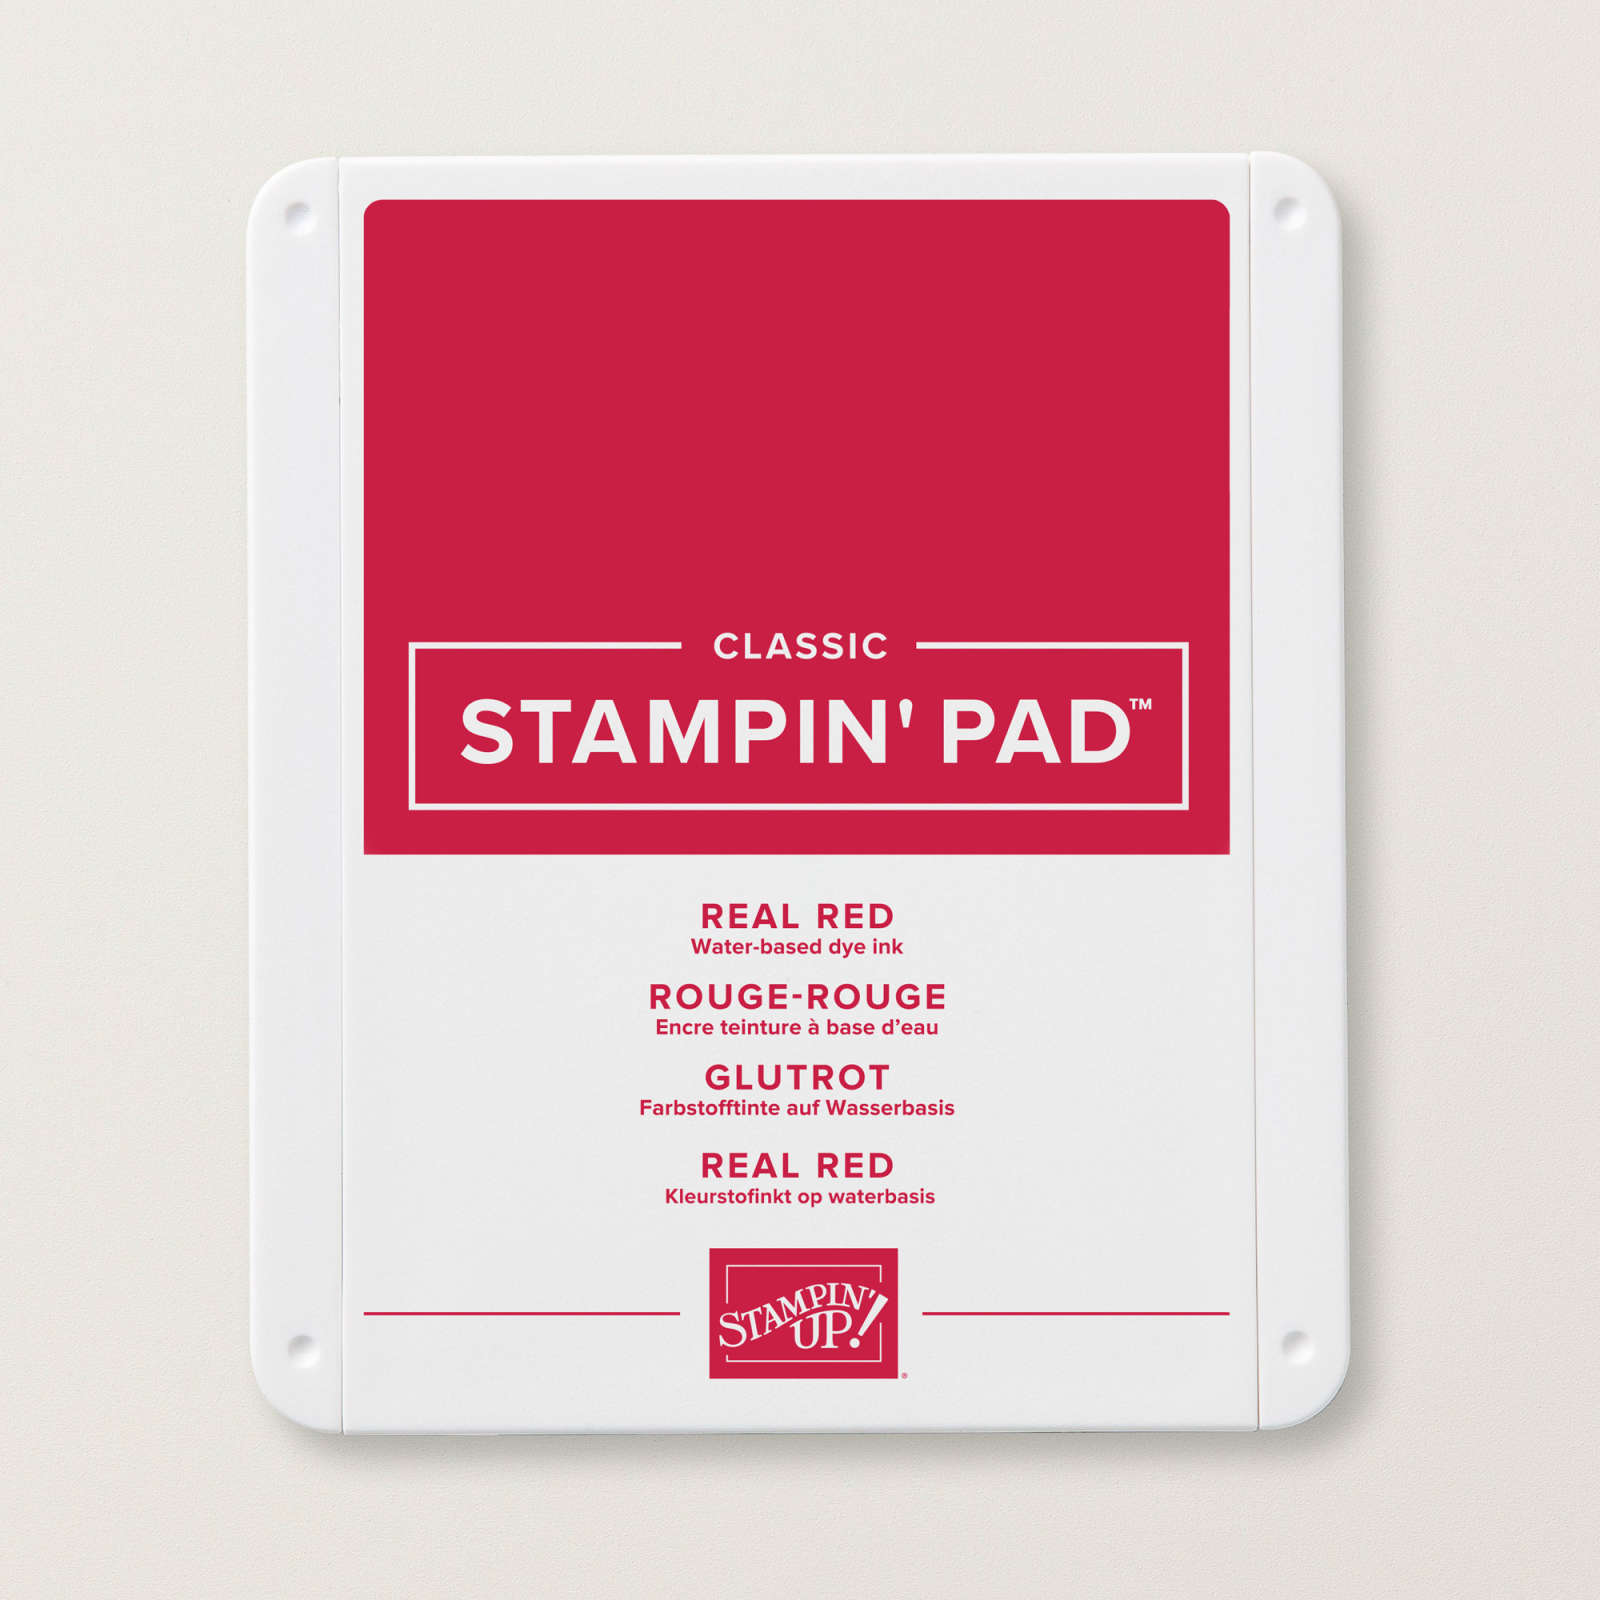 Stamp-Ever Traditional Felt Stamp Pads, Red, Black, 1 Each